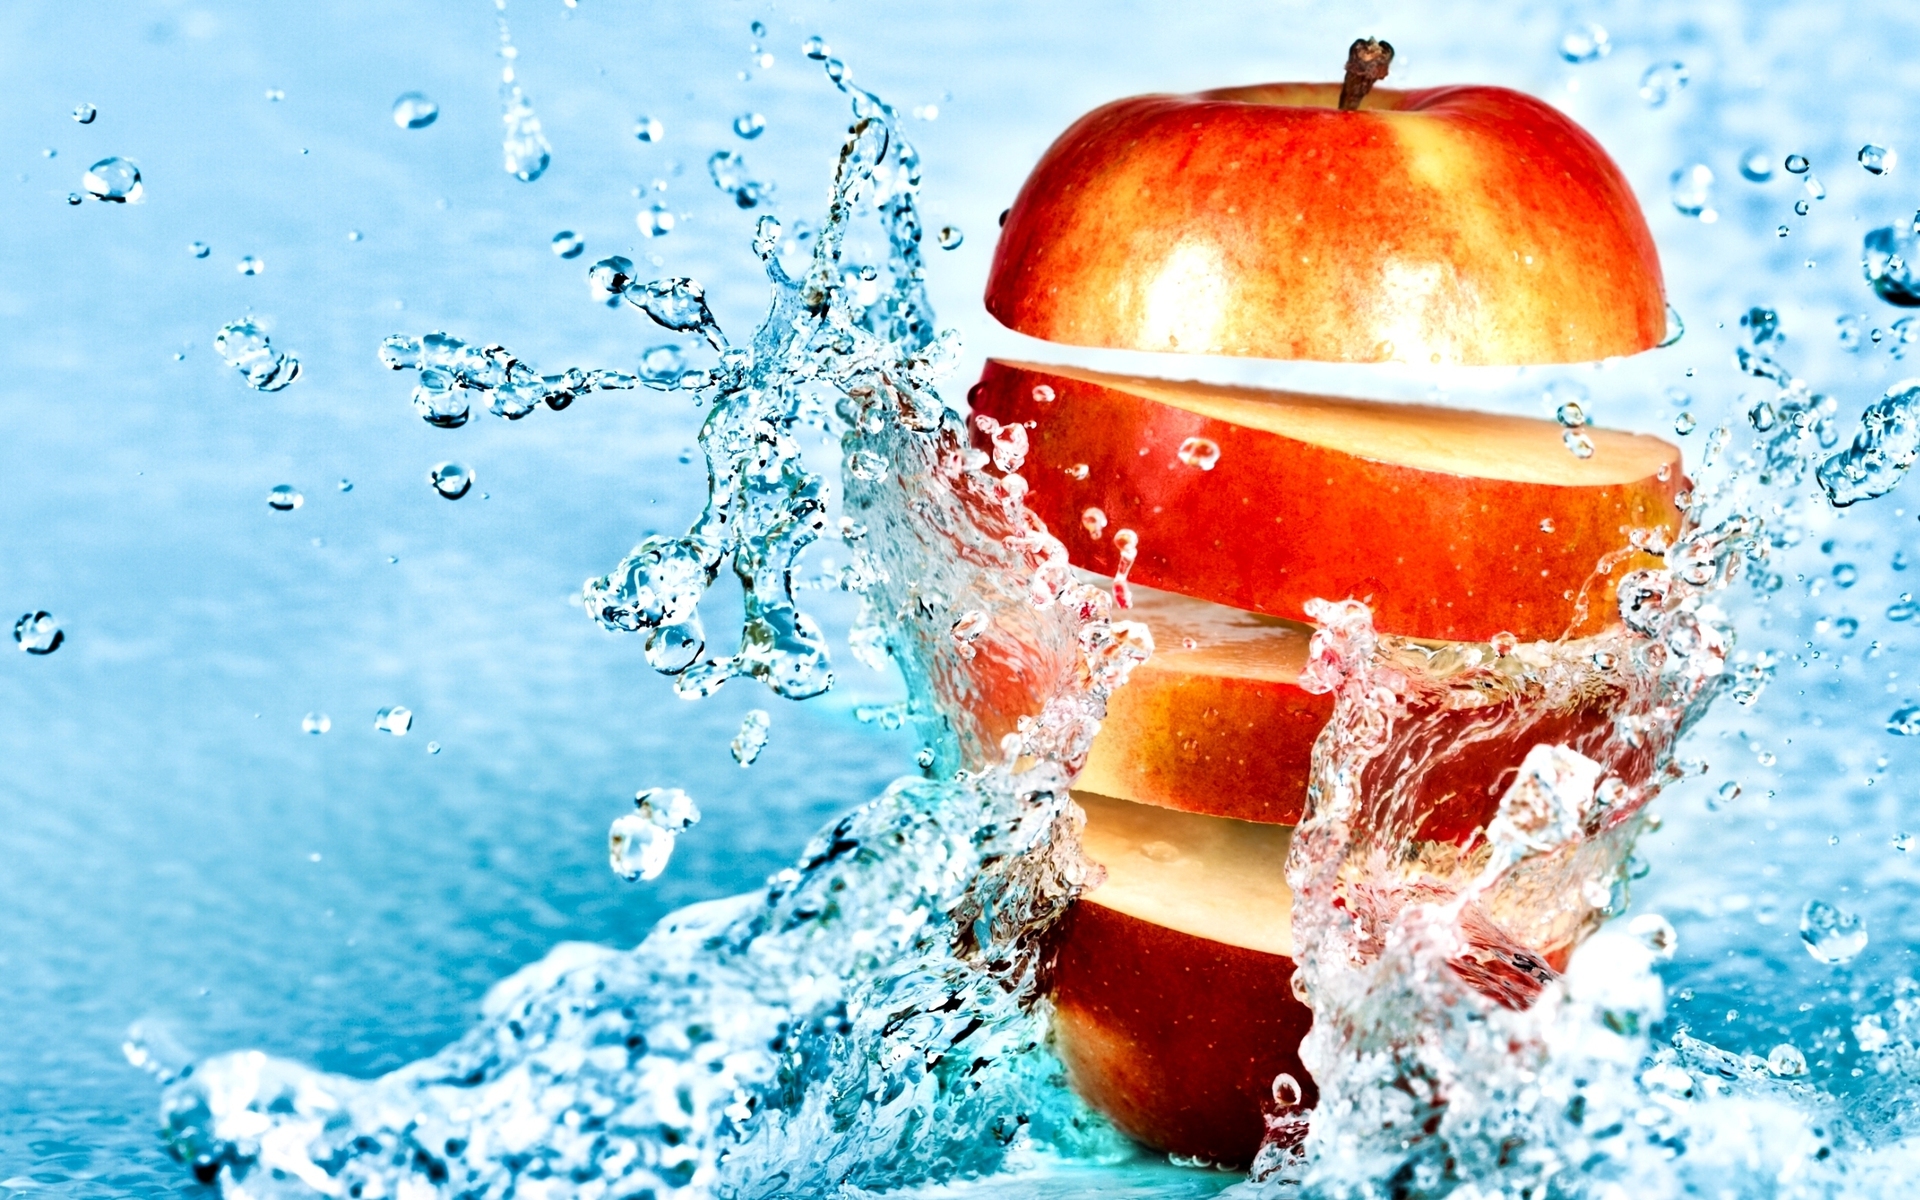 food, Apples, Fruit, Water, Splash, Drops, Stop, Motion, Photography, Bright, Color Wallpaper